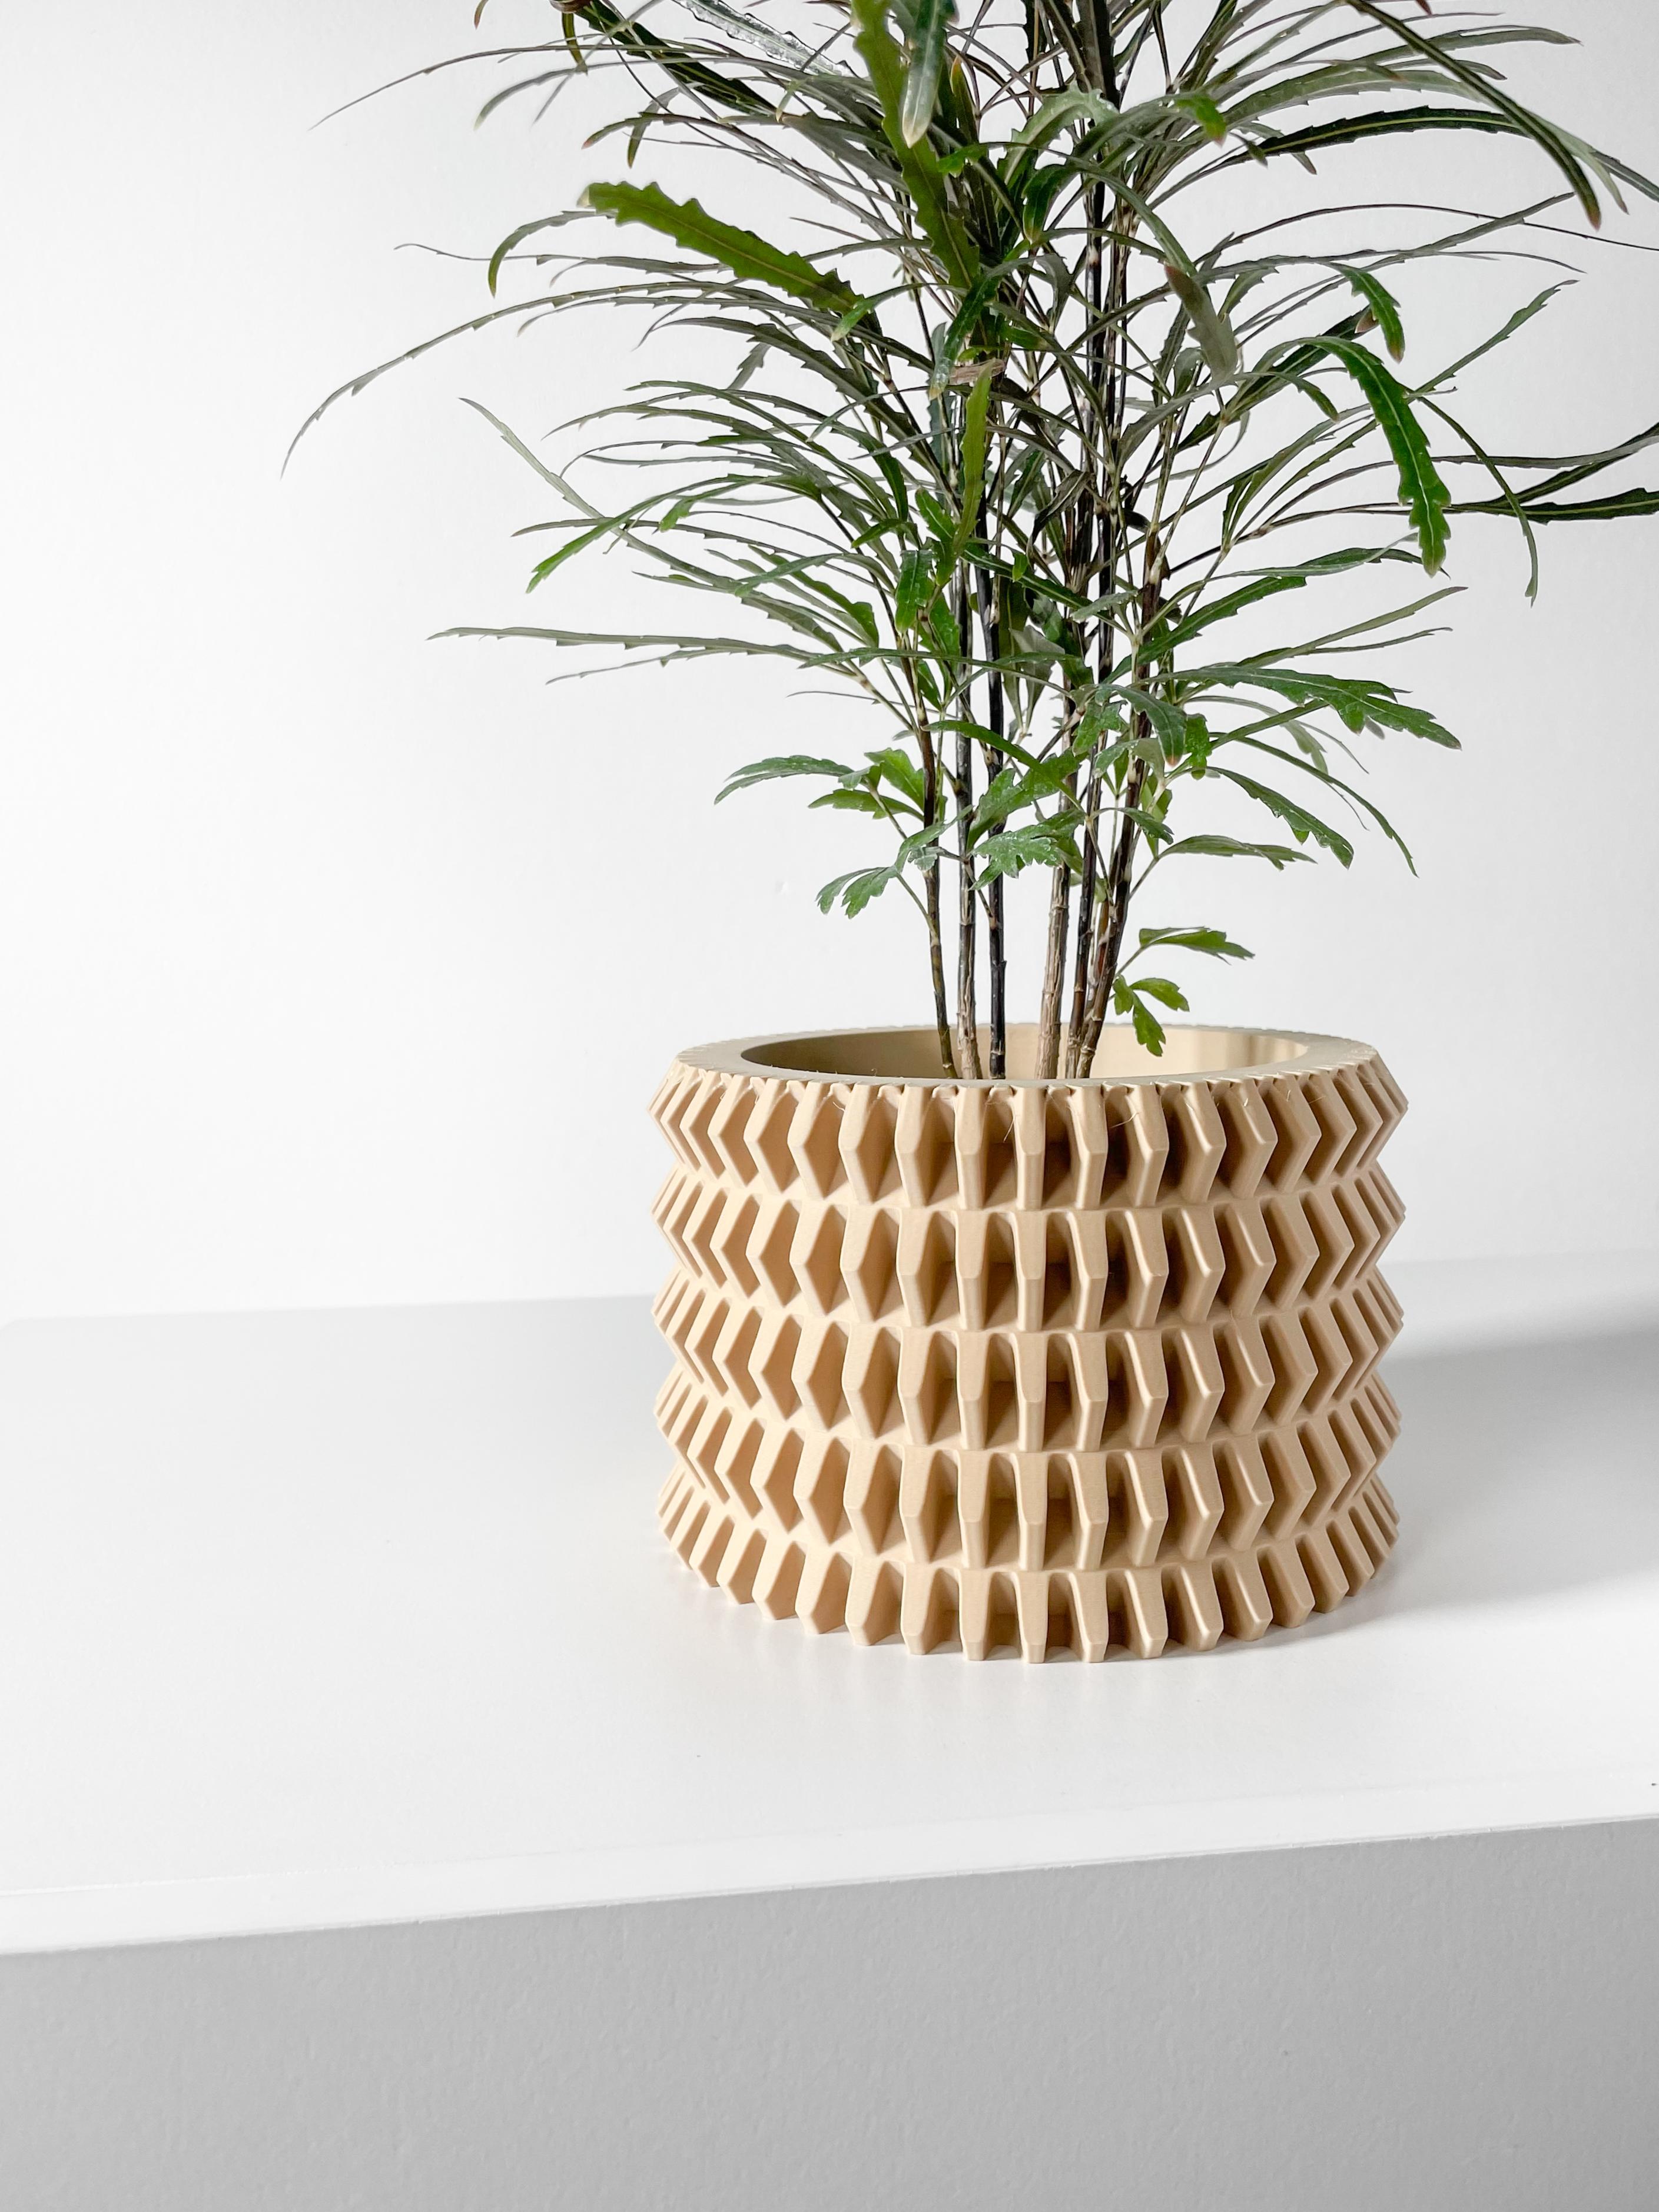 The Nimex Planter Pot with Drainage Tray & Stand Included | Modern and Unique Home Decor 3d model